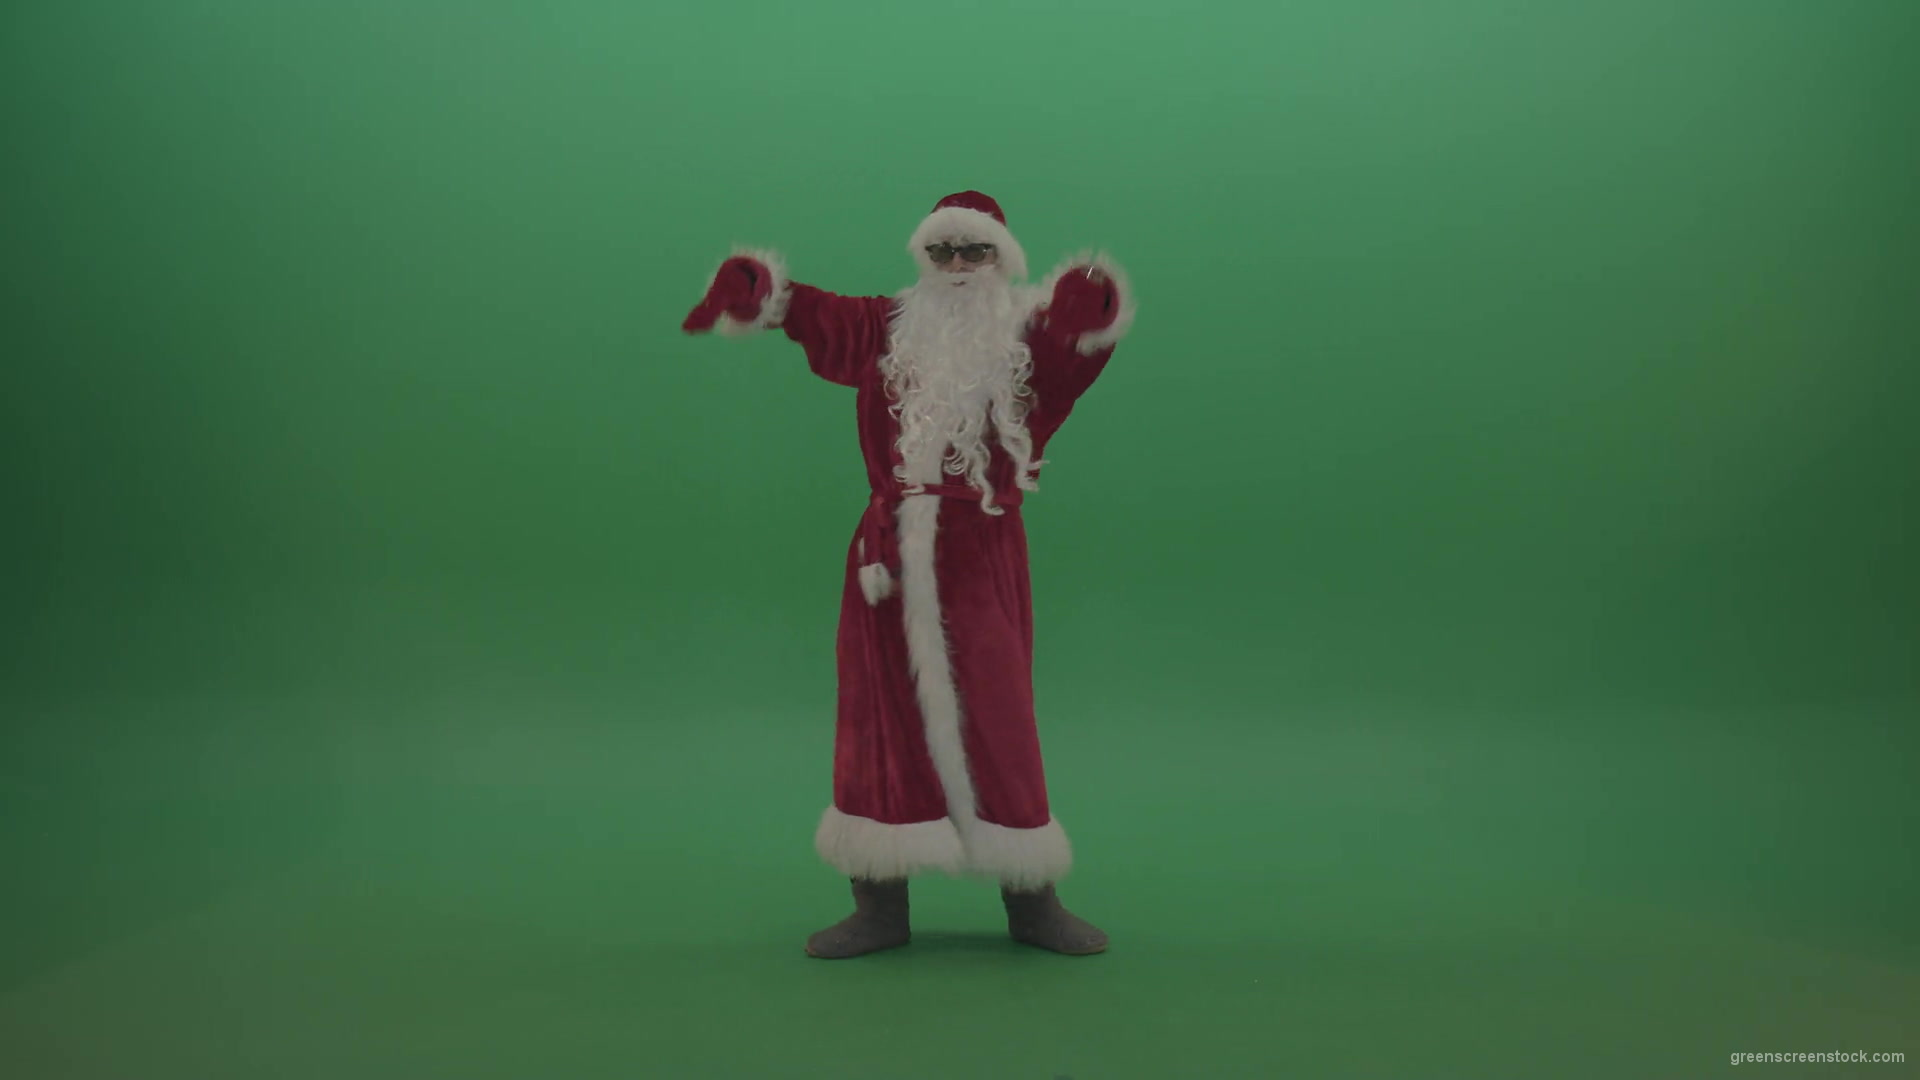 Santa-with-much-swagger-over-the-green-screen-background-1920_006 Green Screen Stock